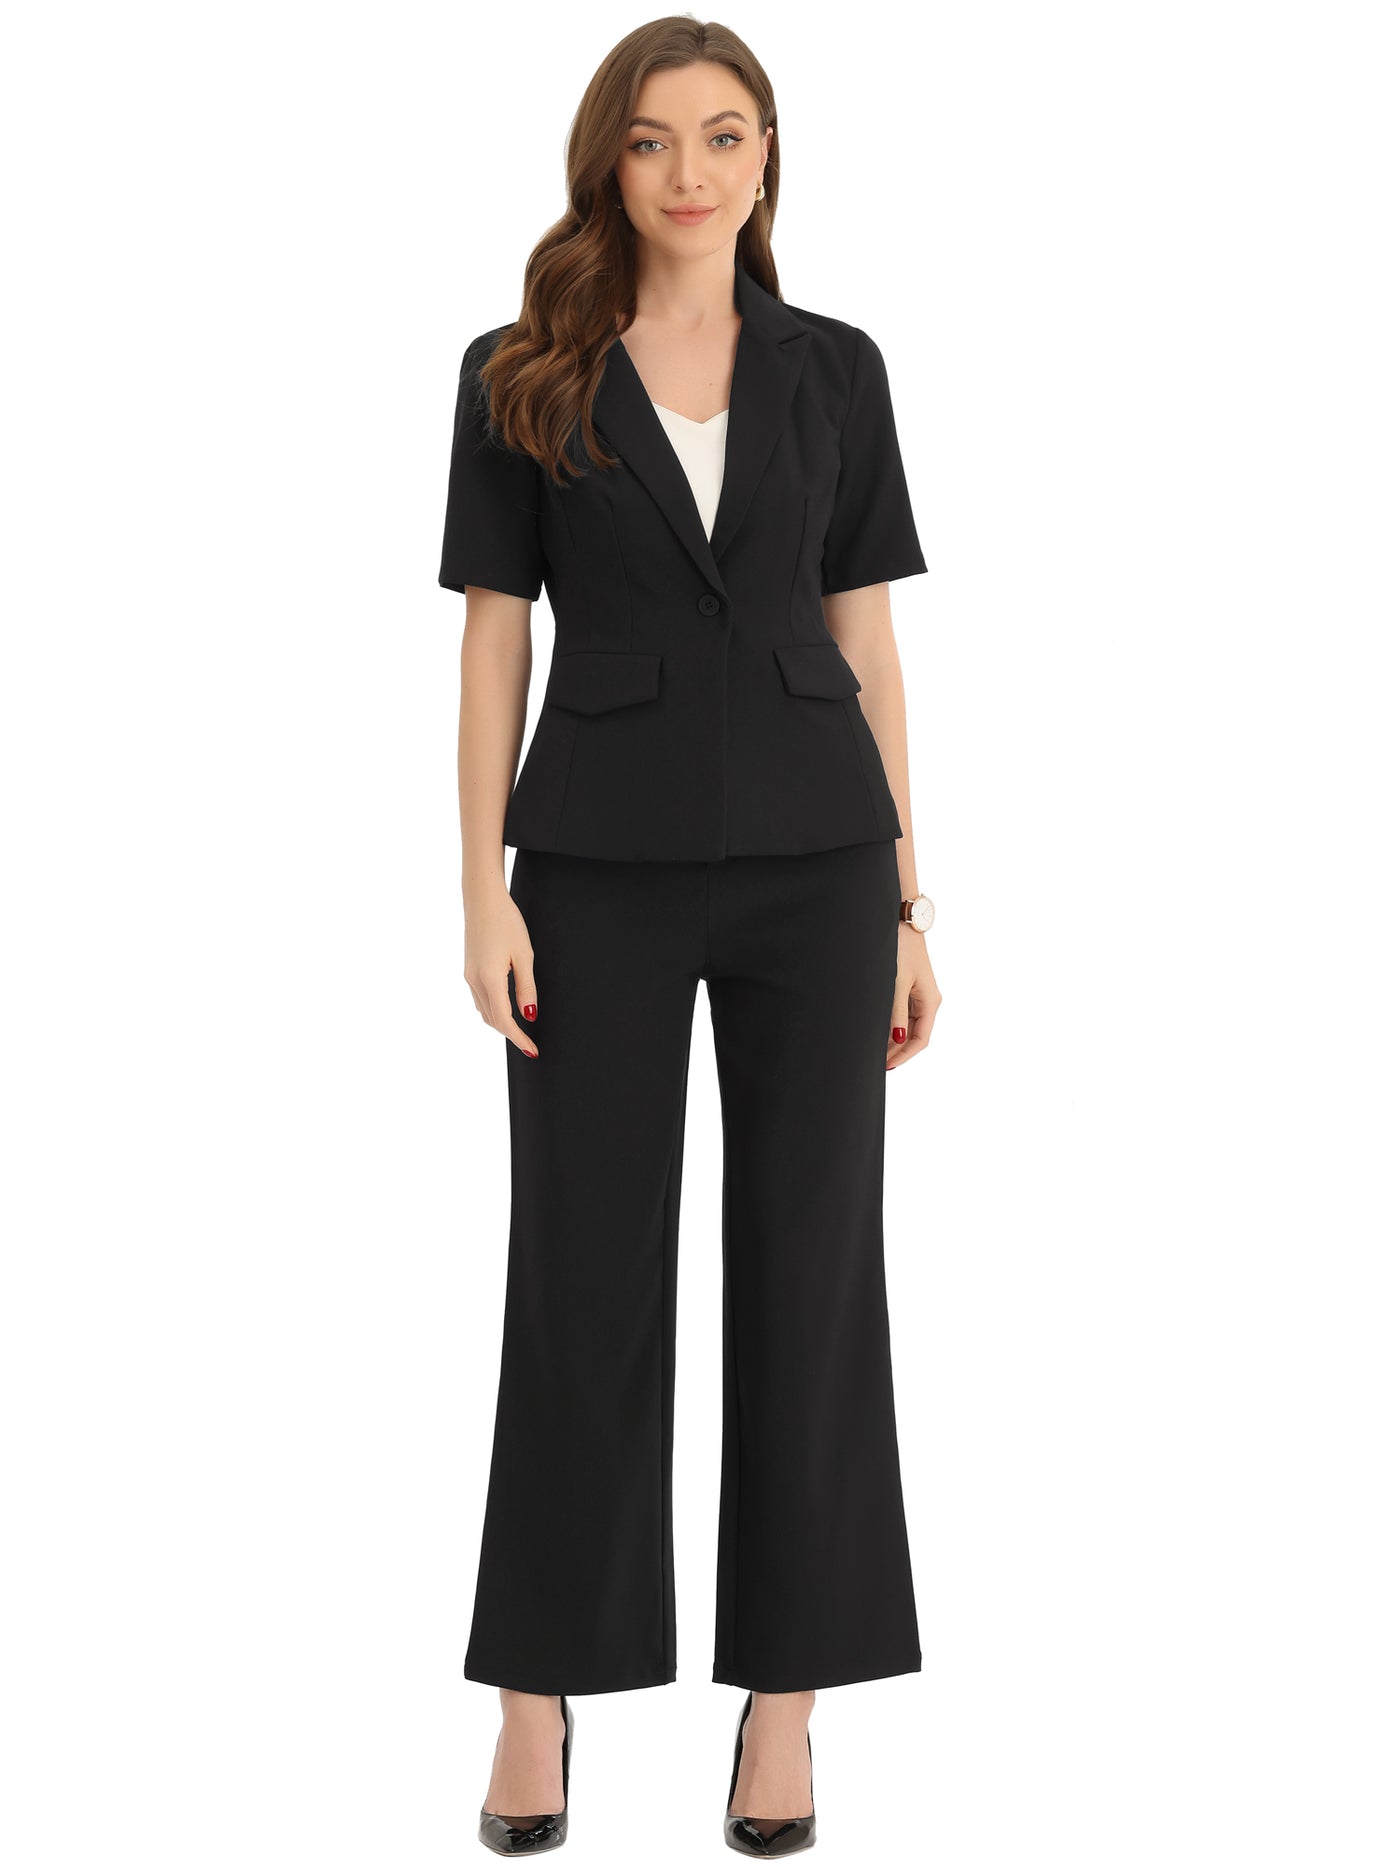 Allegra K 2 Piece Outfits for Women's Business Office Suit Set One Button Short Sleeve Blazer Jacket and Suit Pants